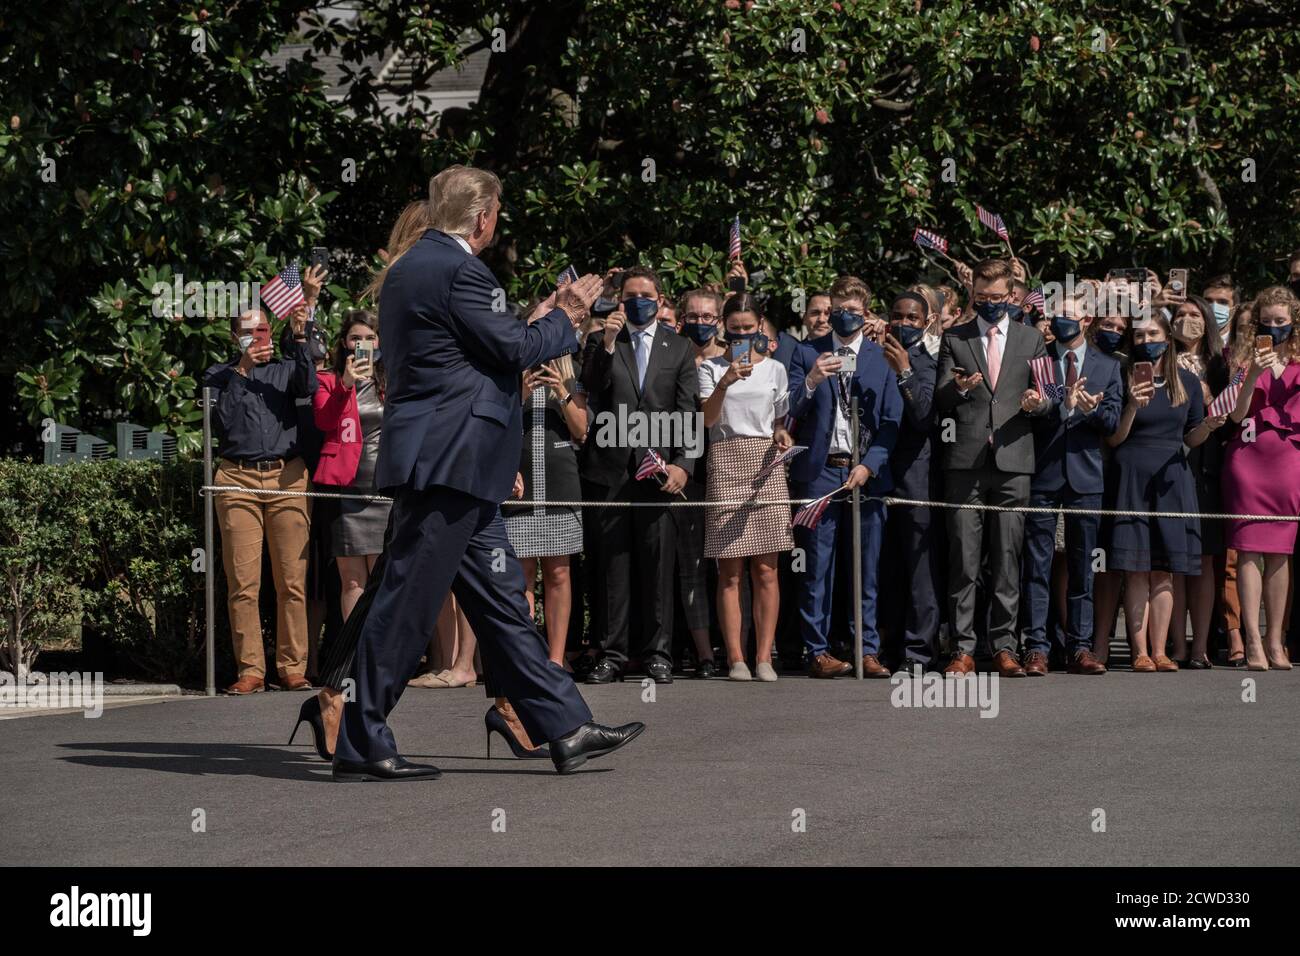 United States President Donald J. Trump and First lady Melania Trump wave to supporters as they walk across the South Lawn to Marine One at the White House in Washington, DC on Monday, September 28, 2020. Trump is traveling to participate in the First Presidential Debate against former Vice President Joe Biden in Cleveland, Ohio.Credit: Ken Cedeno/Pool via CNP /MediaPunch Stock Photo